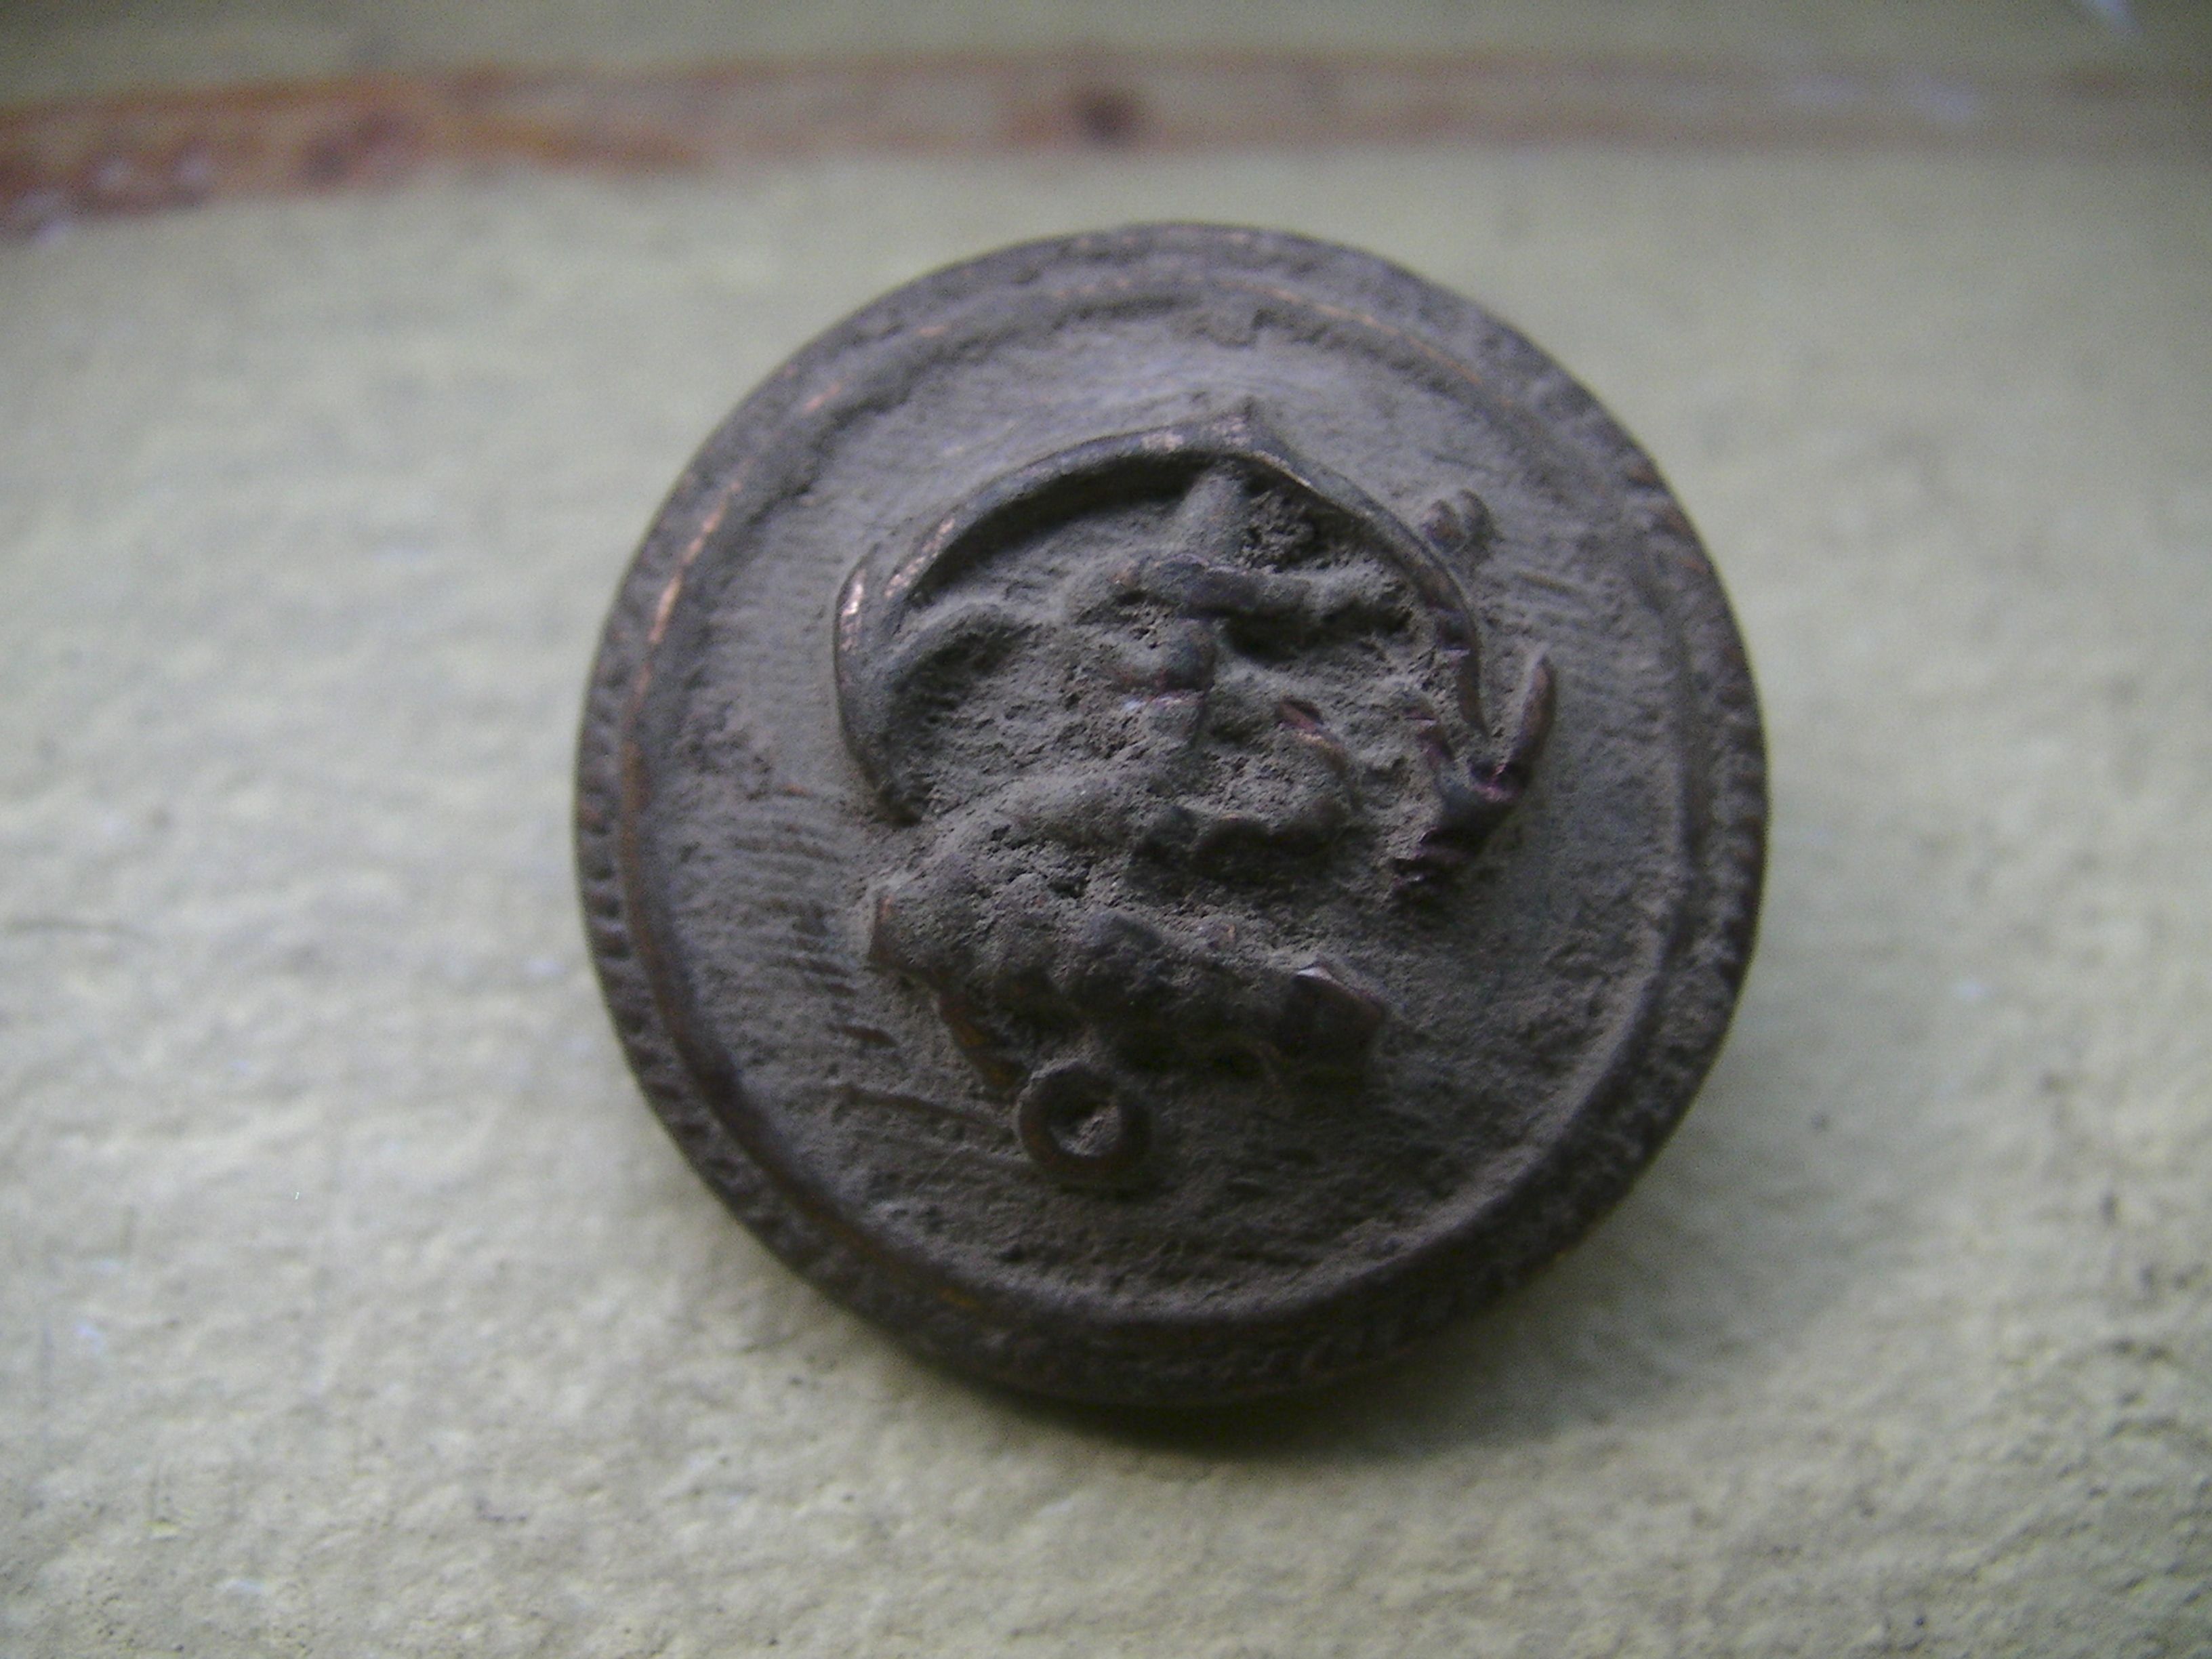 Military button